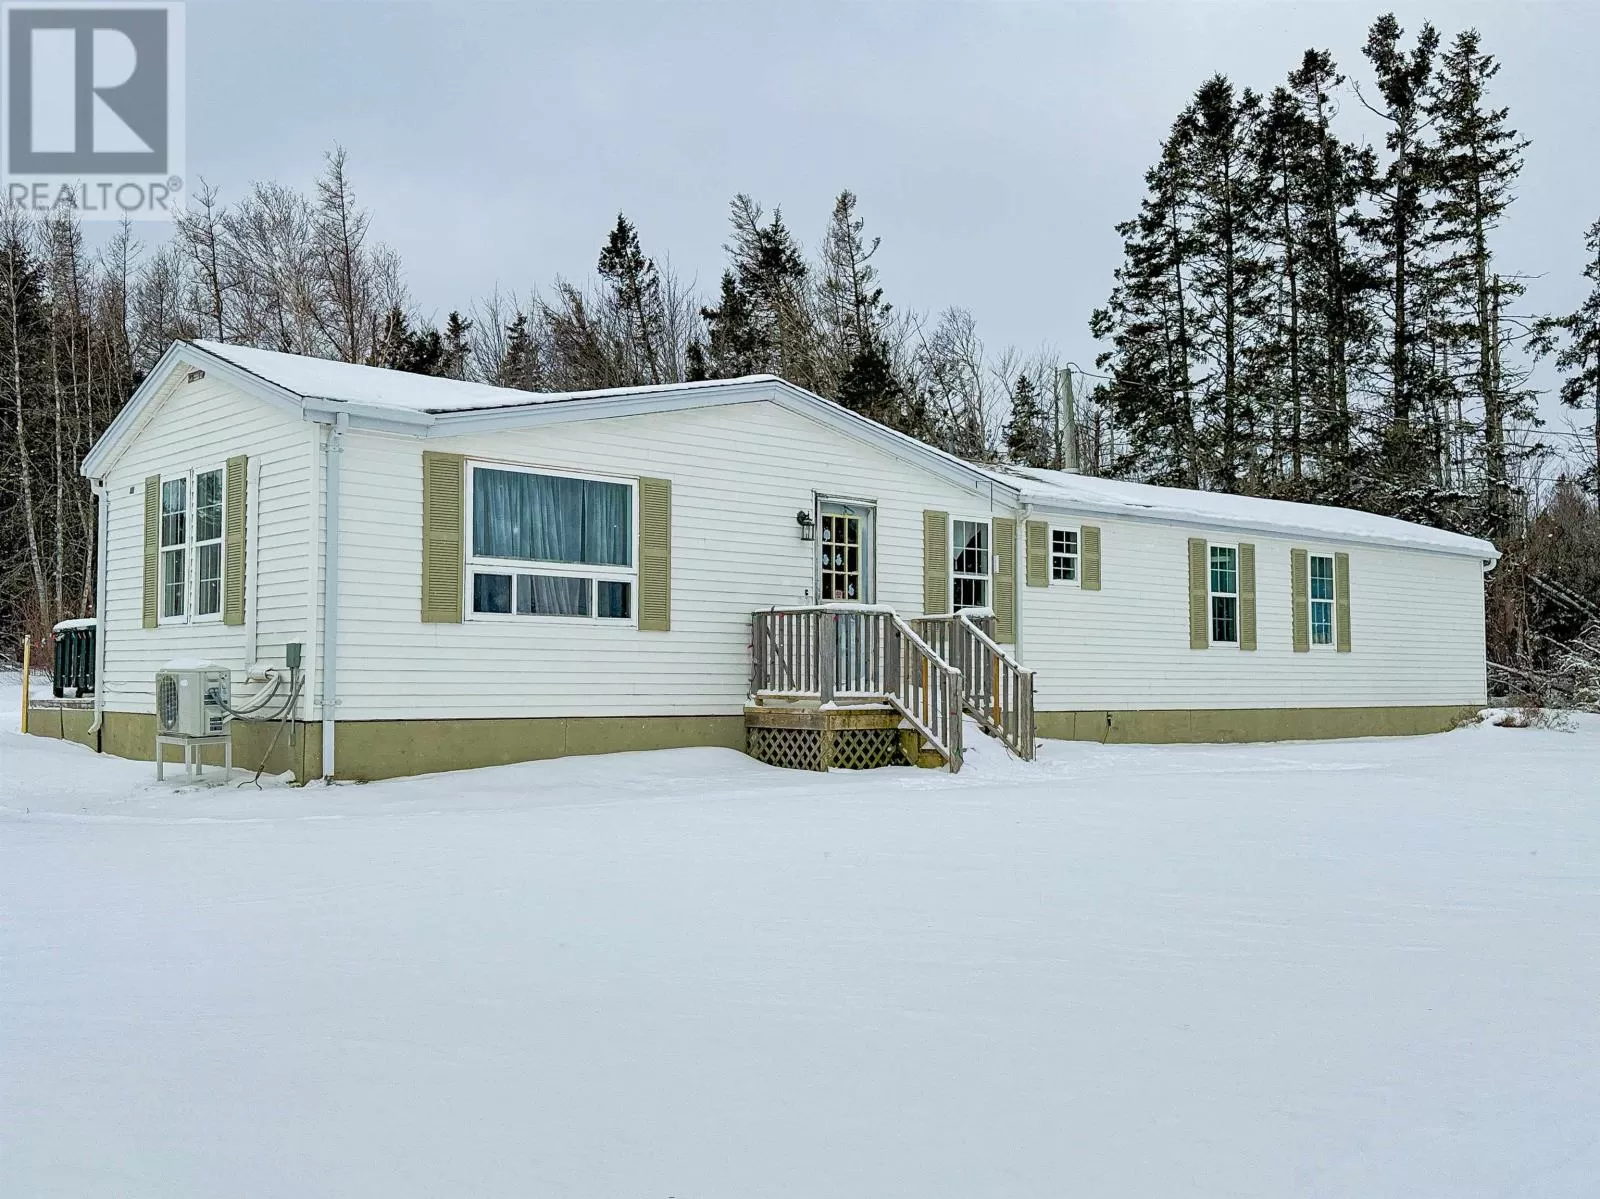 Mobile Home for rent: N/a To Be Moved, Cardigan, Prince Edward Island C0A 1G0